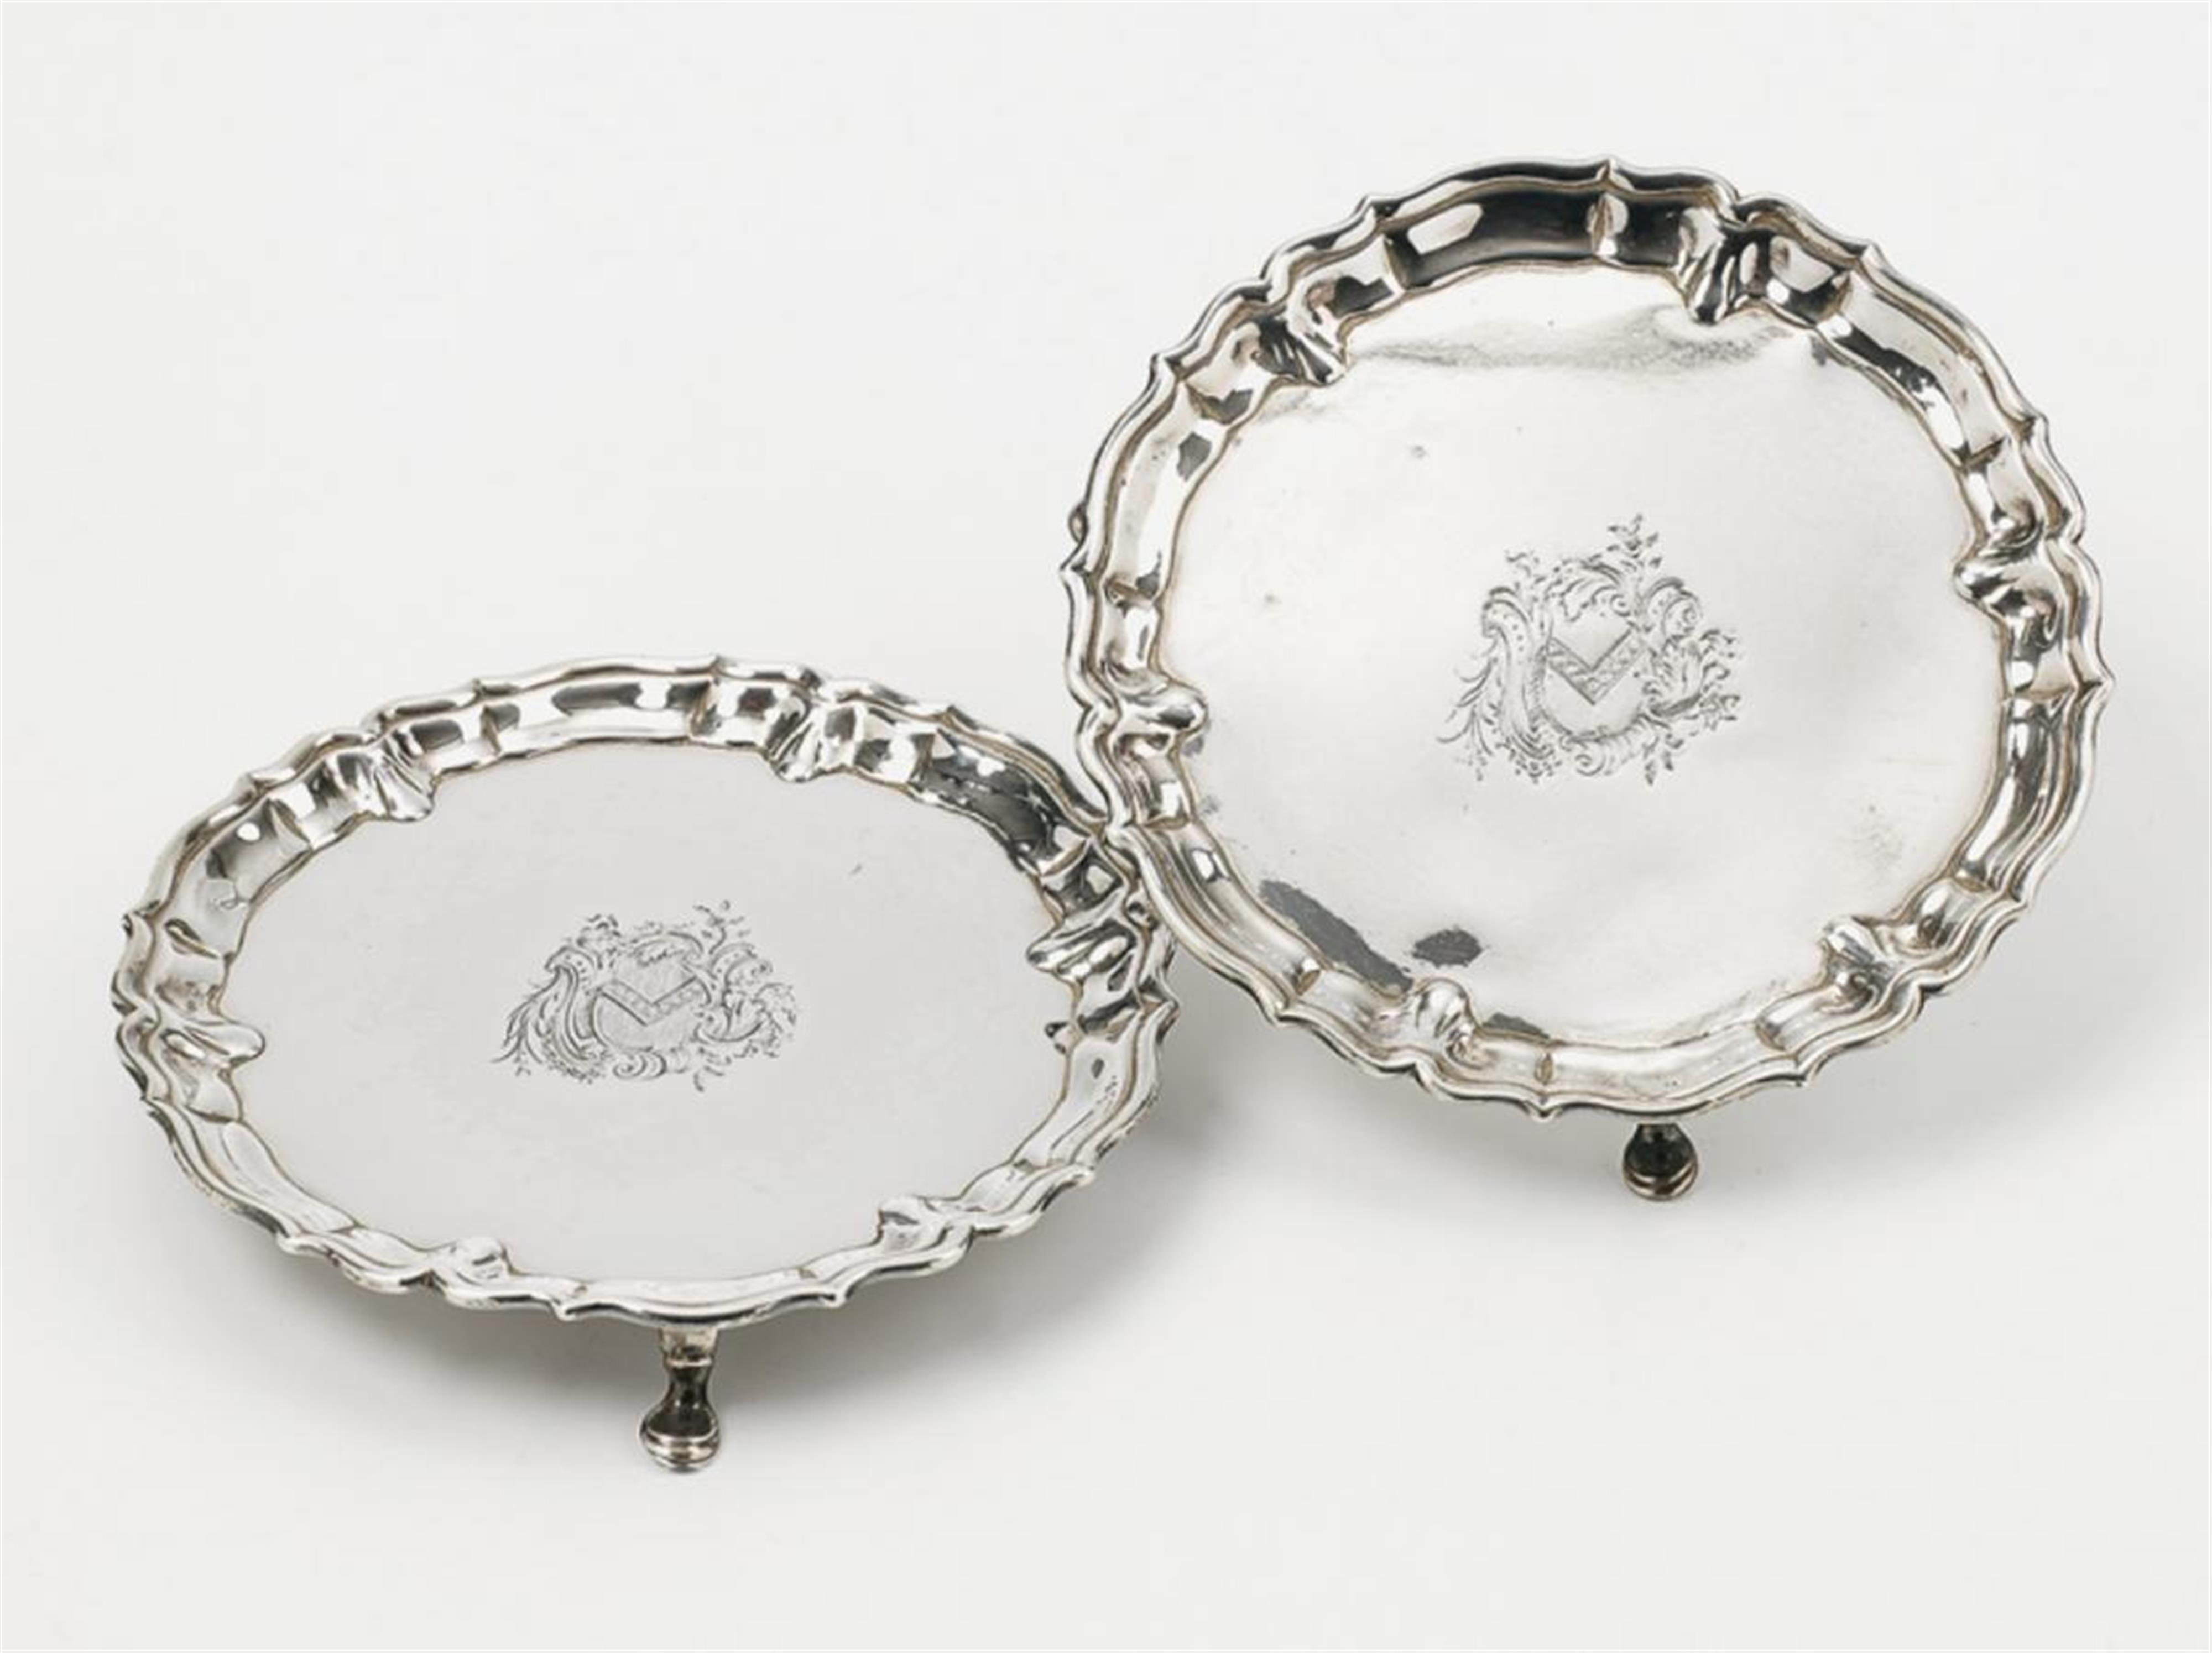 A pair of George II silver salvers. Engraved with a coat-of-arms. Marks of John Tuite, London 1737. - image-1